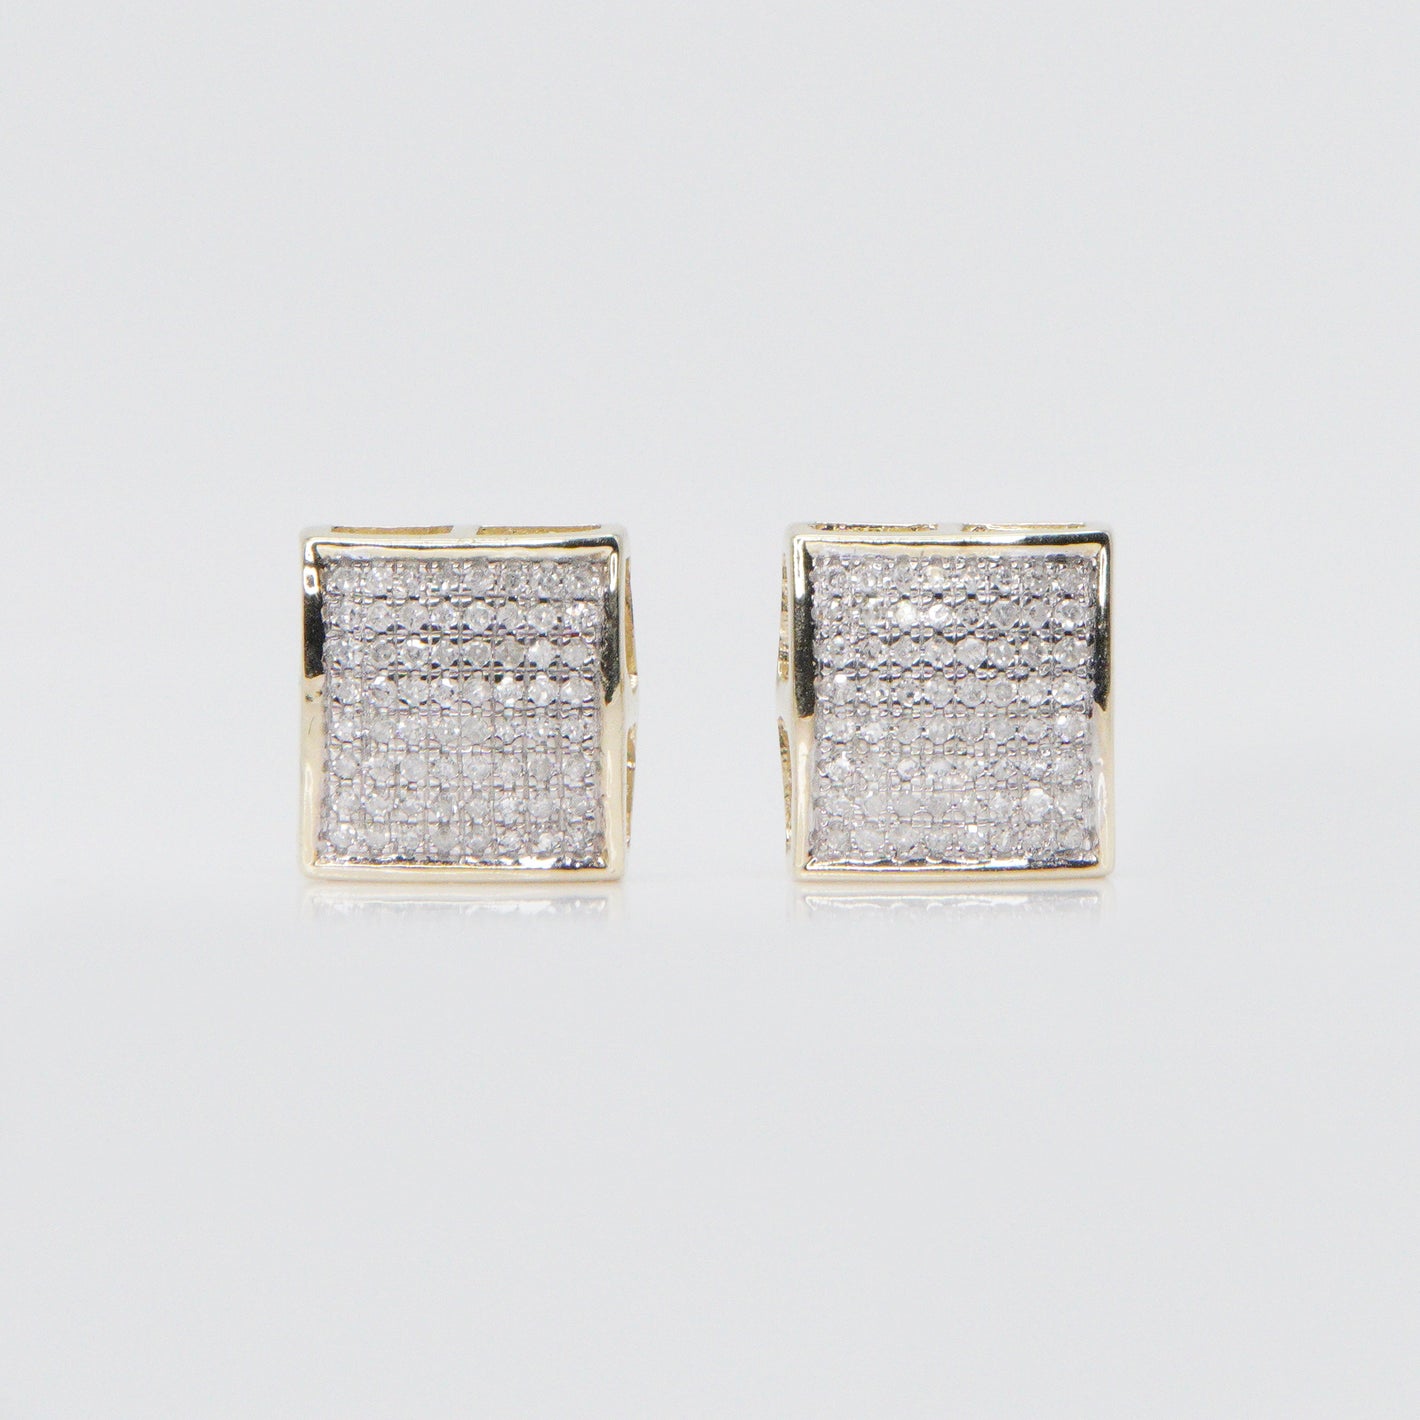 10k Solid Gold 12mm Square Dome Earrings